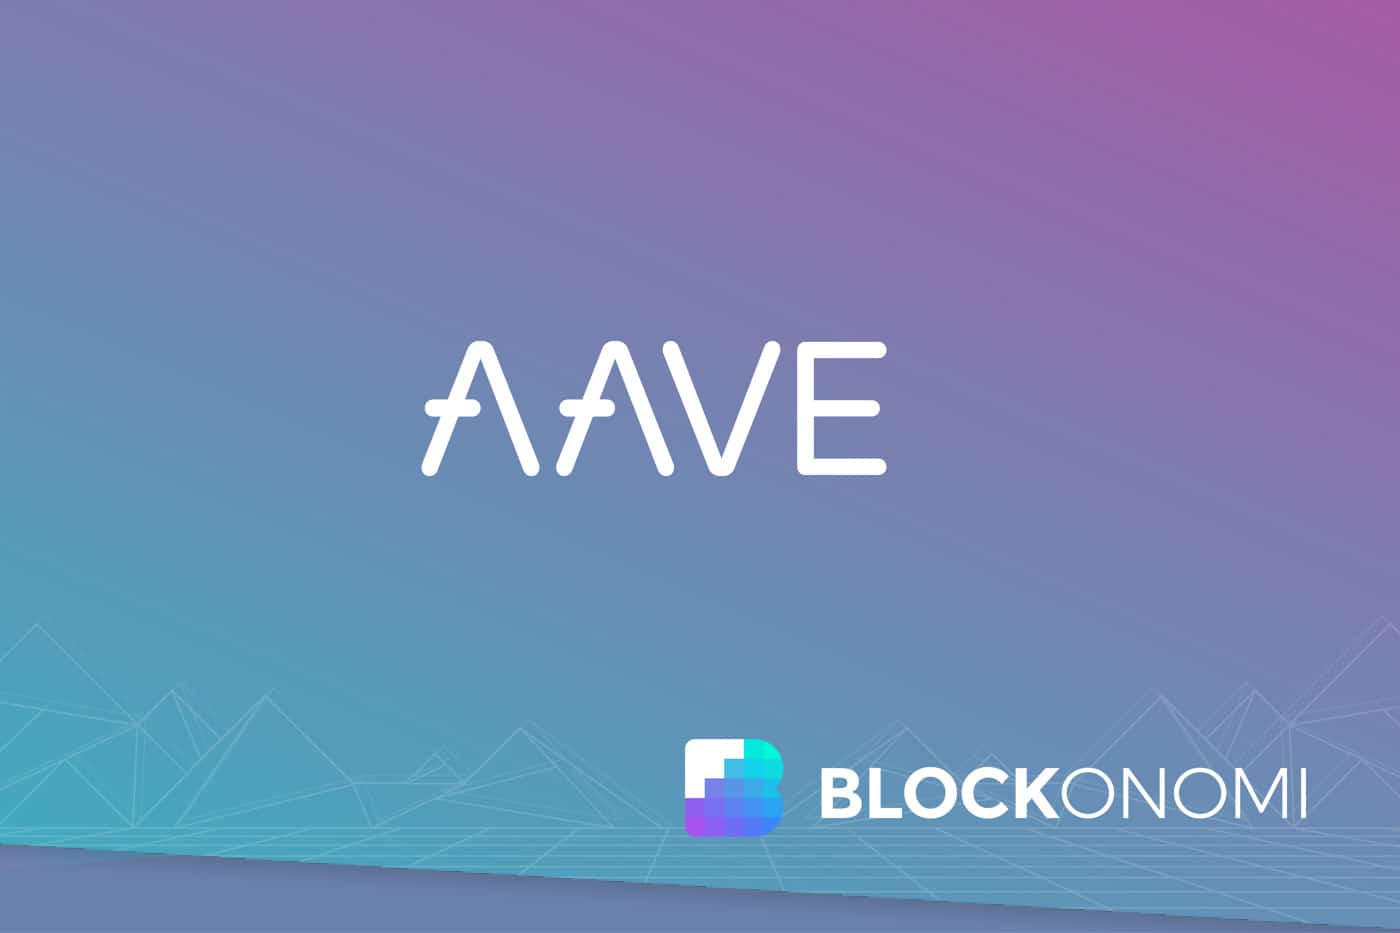 Getting Started With AAVE: Earn, Borrow & More With This DeFi Platform